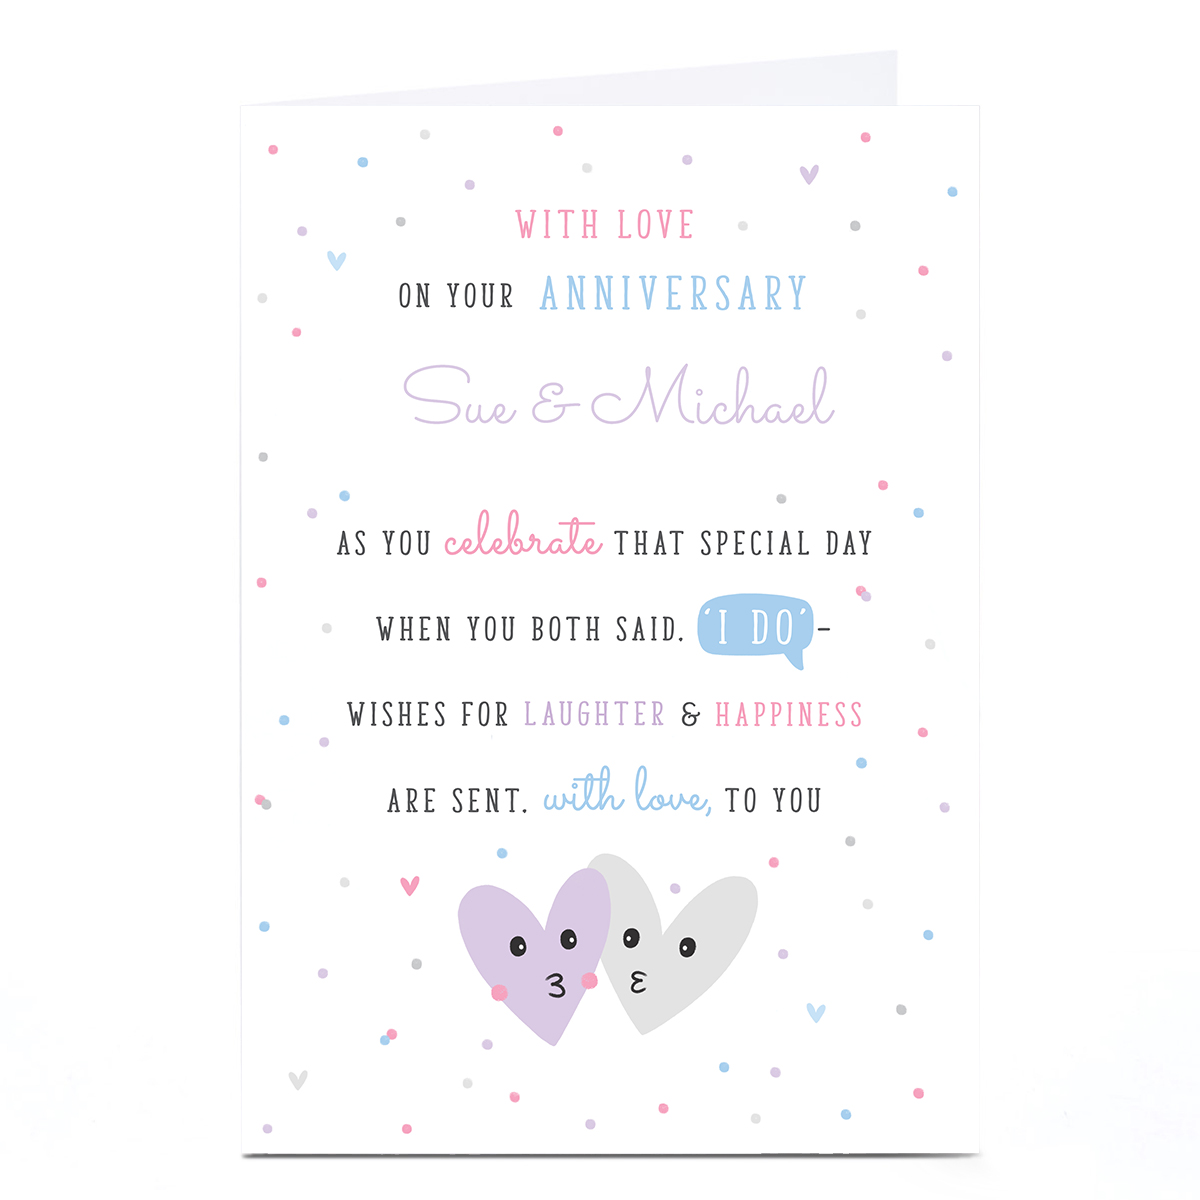 Personalised Wedding Anniversary Card - Laughter & Happiness